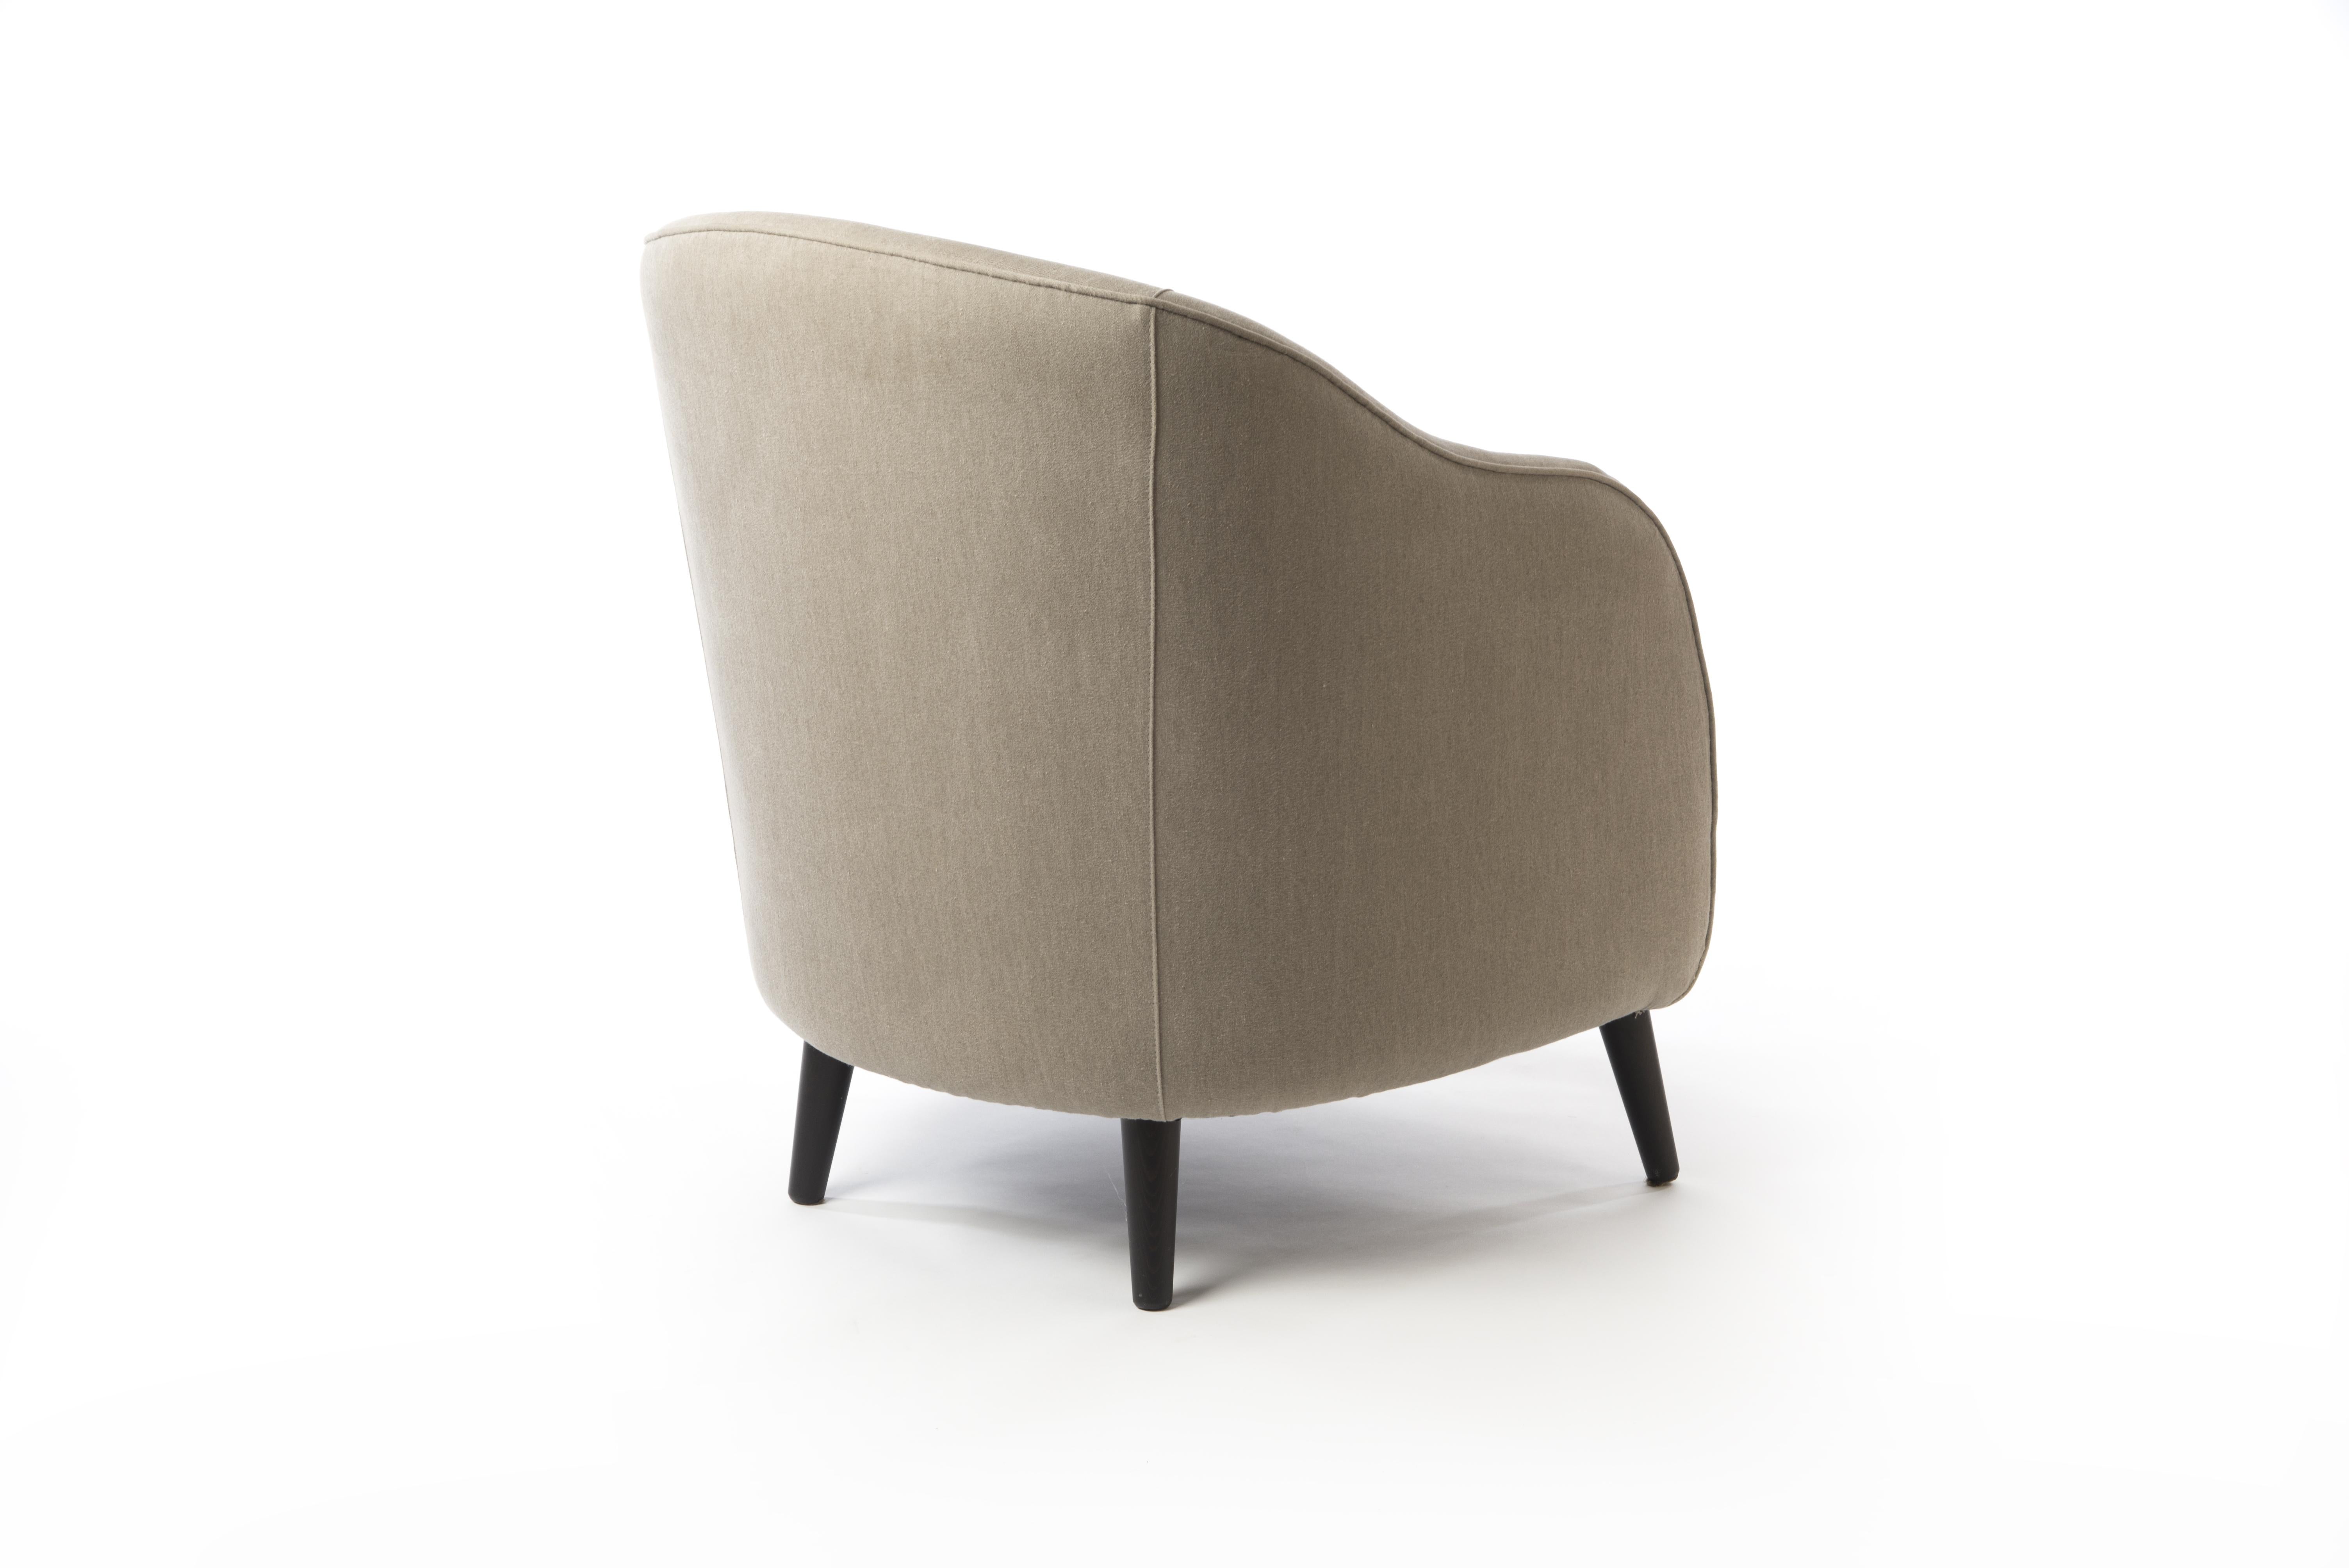 This adorable armchair featuring solid beechwood legs and a beige cotton fabric instantly conveys the feeling of casual living. With its natural look this armchair is a great addition to any Nordic or Scandinavian interior. The rounded Silhouette of